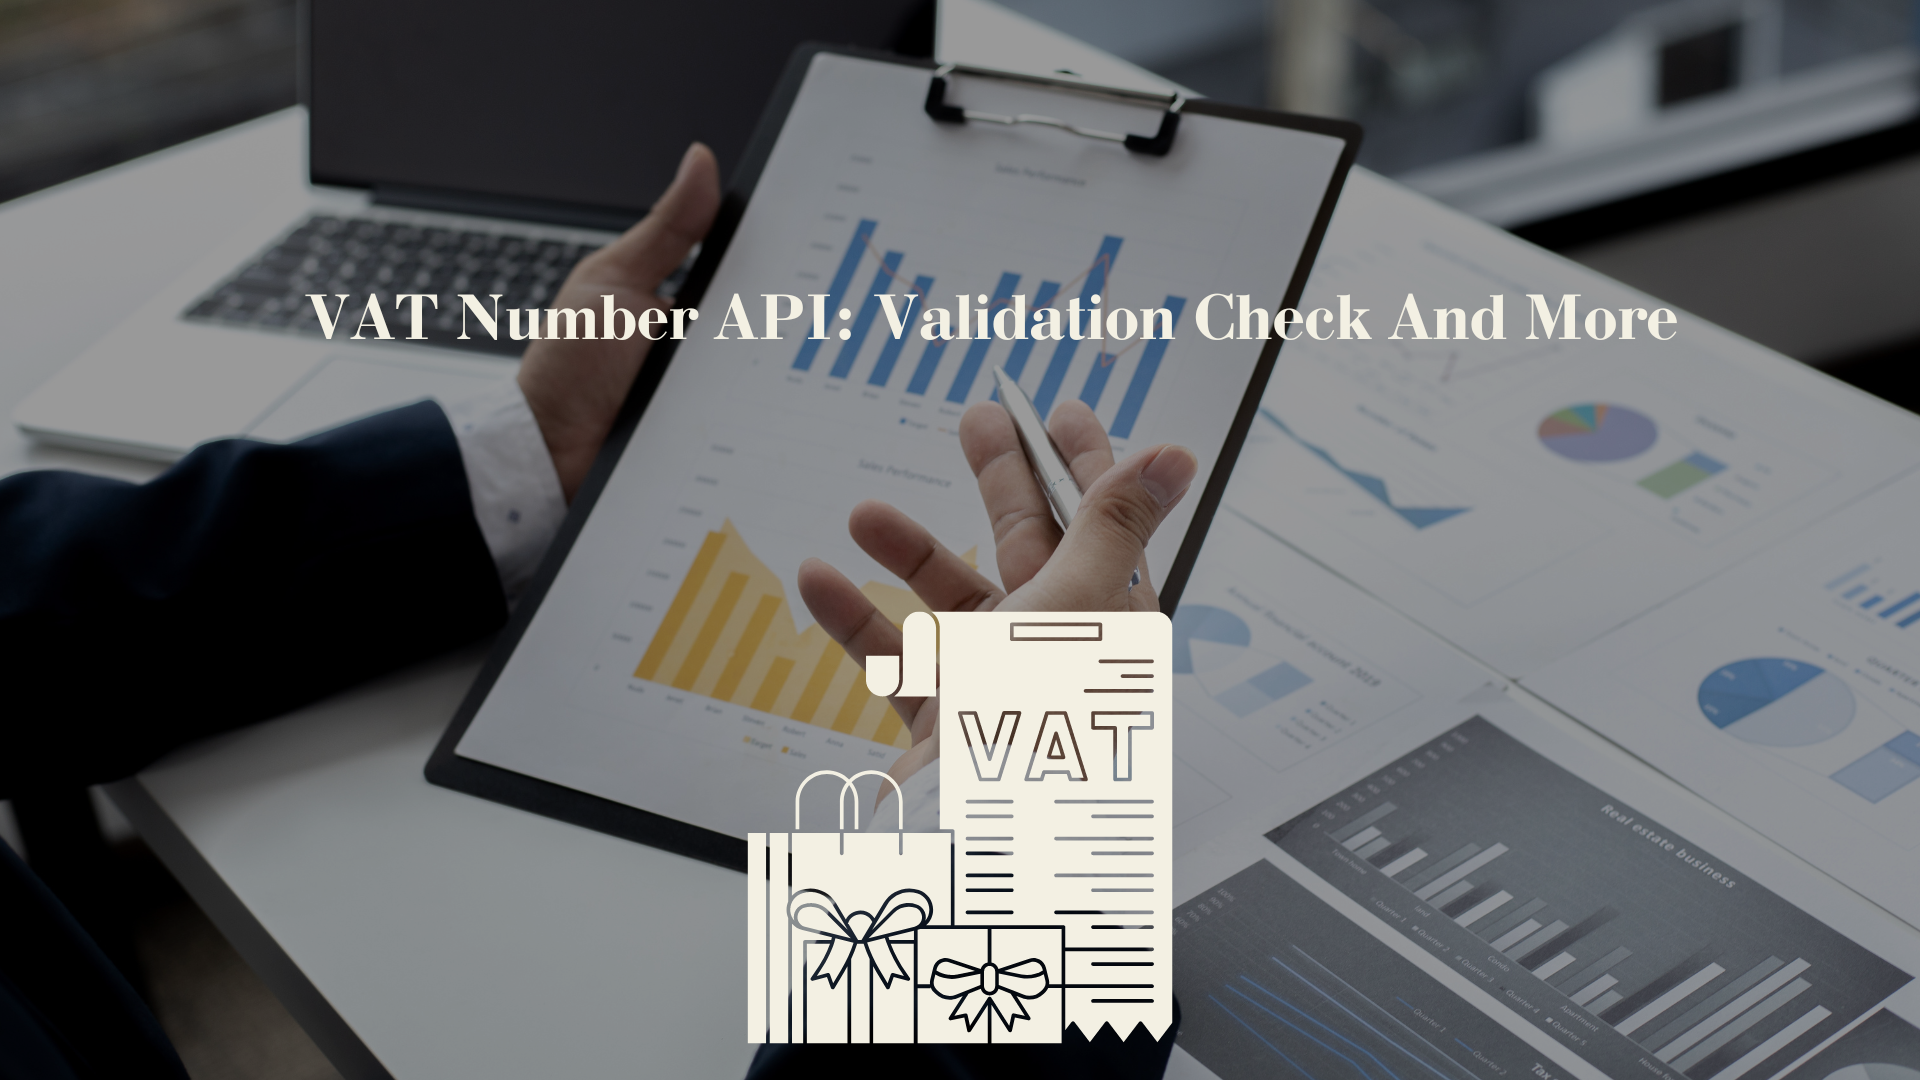 VAT Number API: Validation Check And More